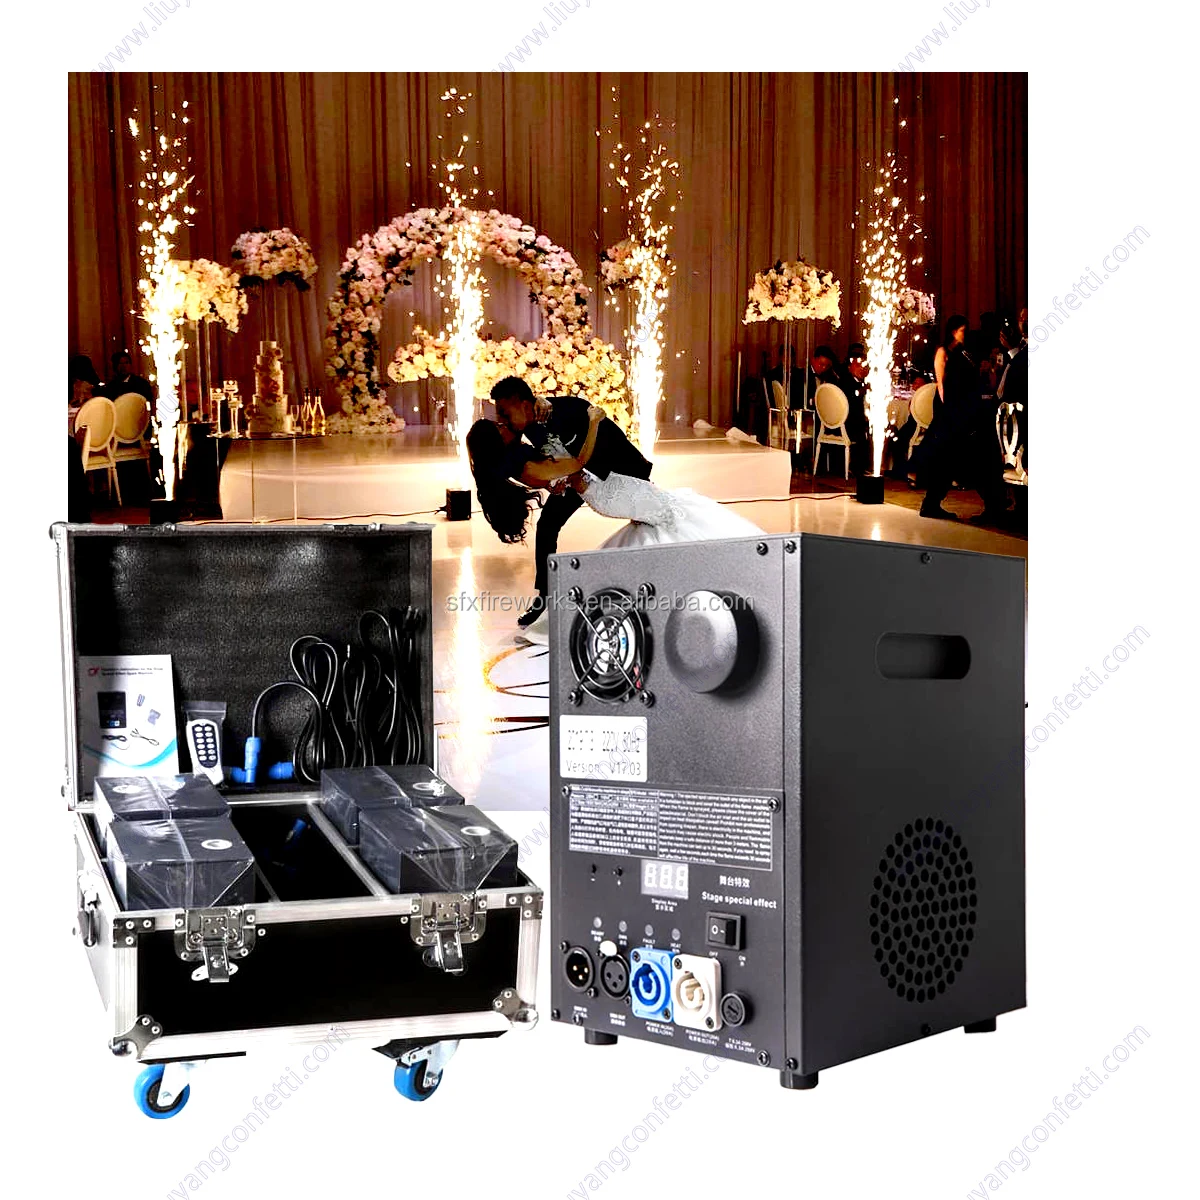 Indoor Outdoor 500W Cold Spark Firework Machine Stage Special Effect DMX Machine For DJ Wedding Event Party Ceremony Concert Show Fixture HTTMT- P/N: ET-TOOL012-RAW 1Pc 